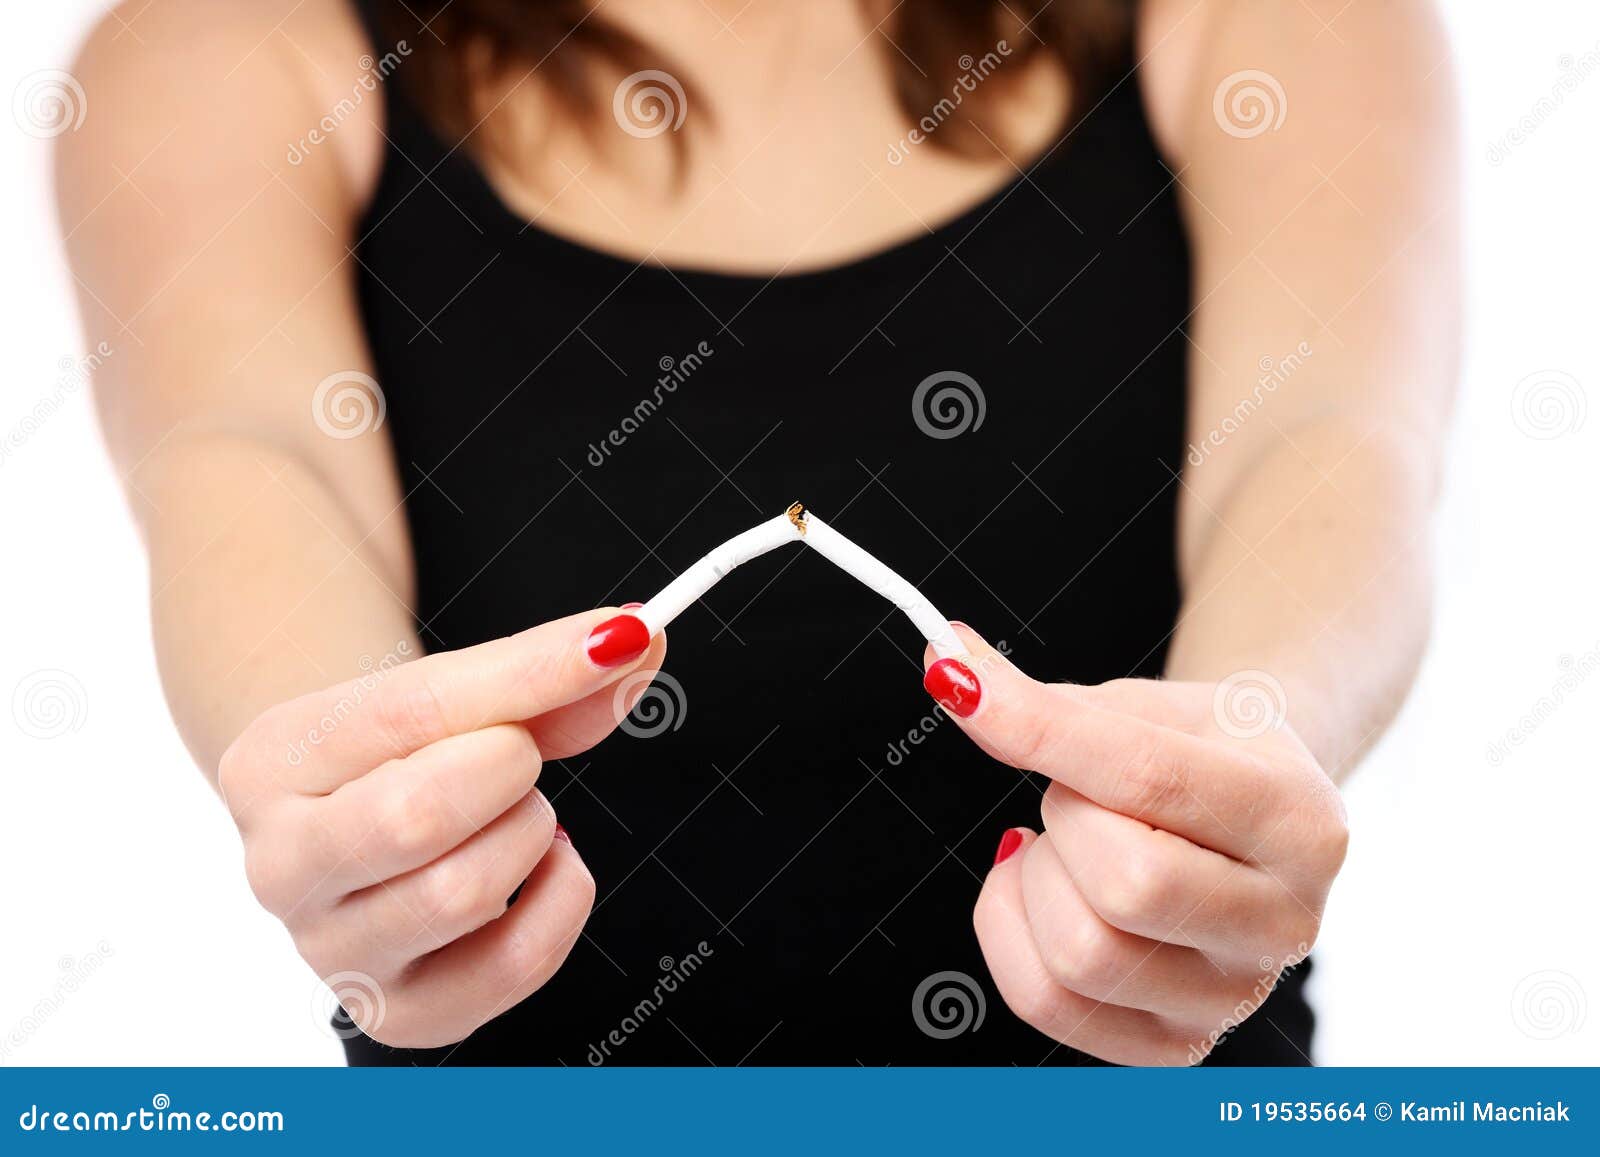 10 reasons smoking is bad for you